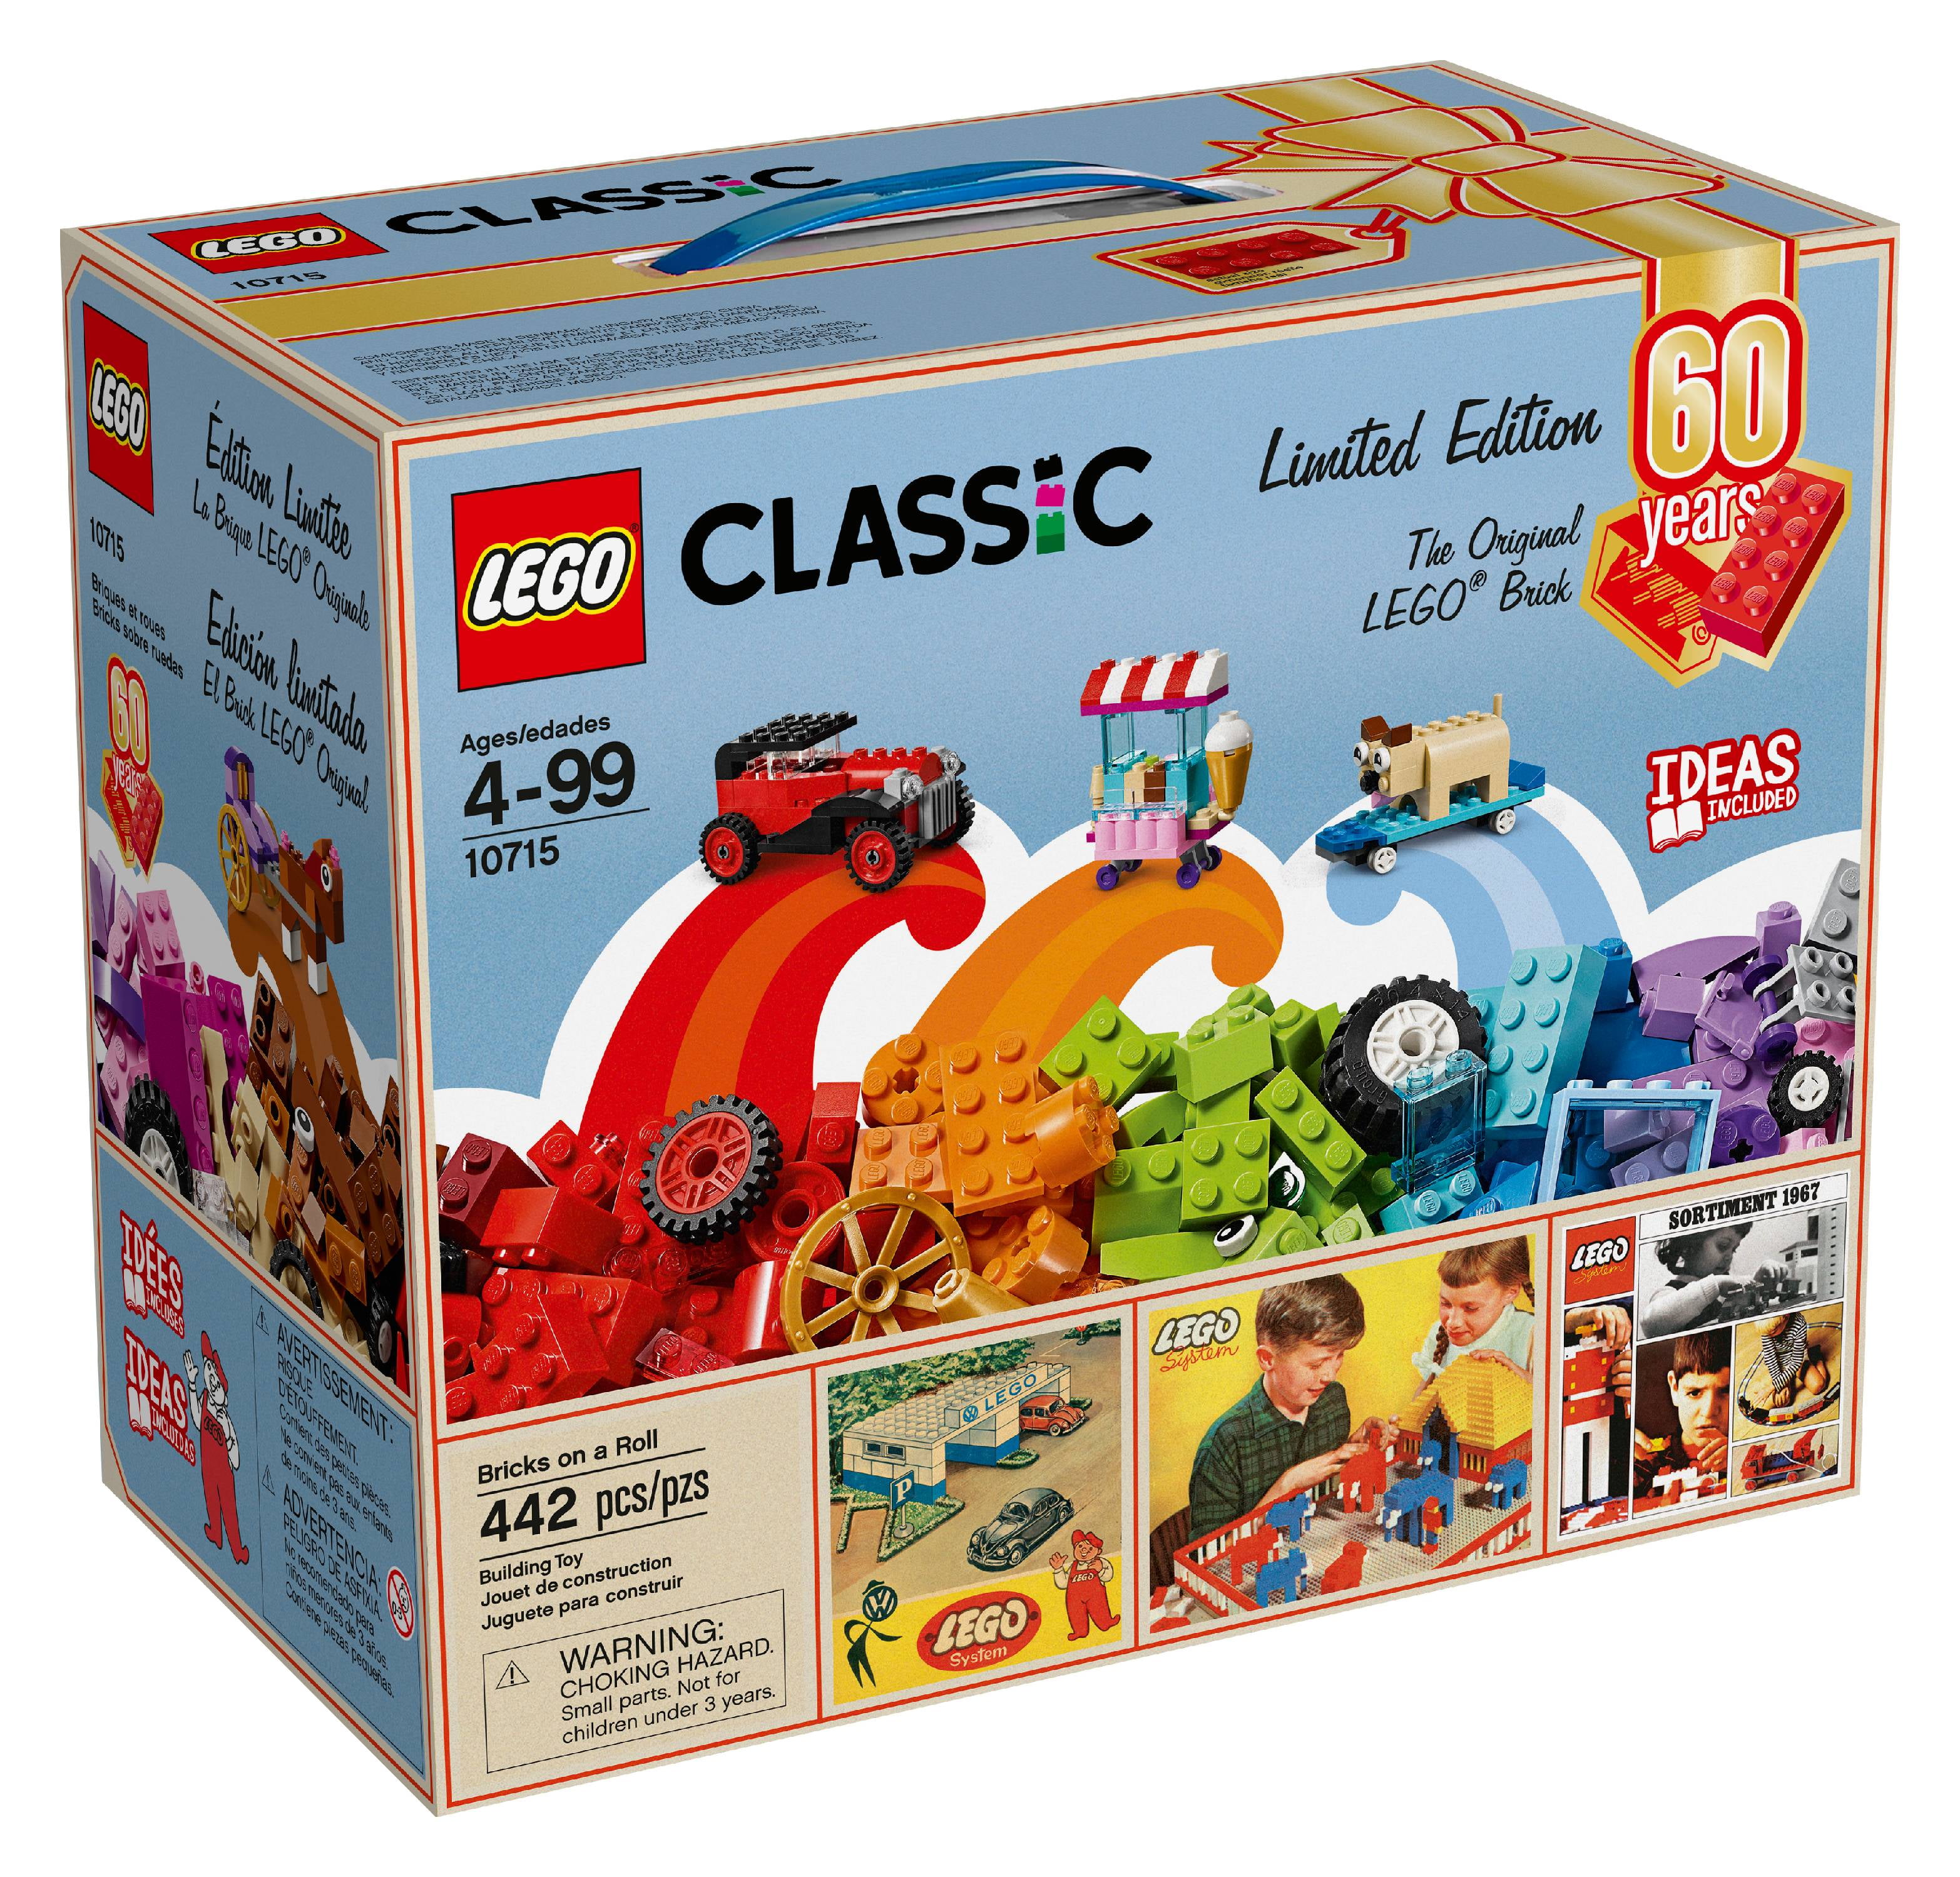 10715 Lego Classic Bricks on a Roll 60th Anniversary Limited Edition for sale online 